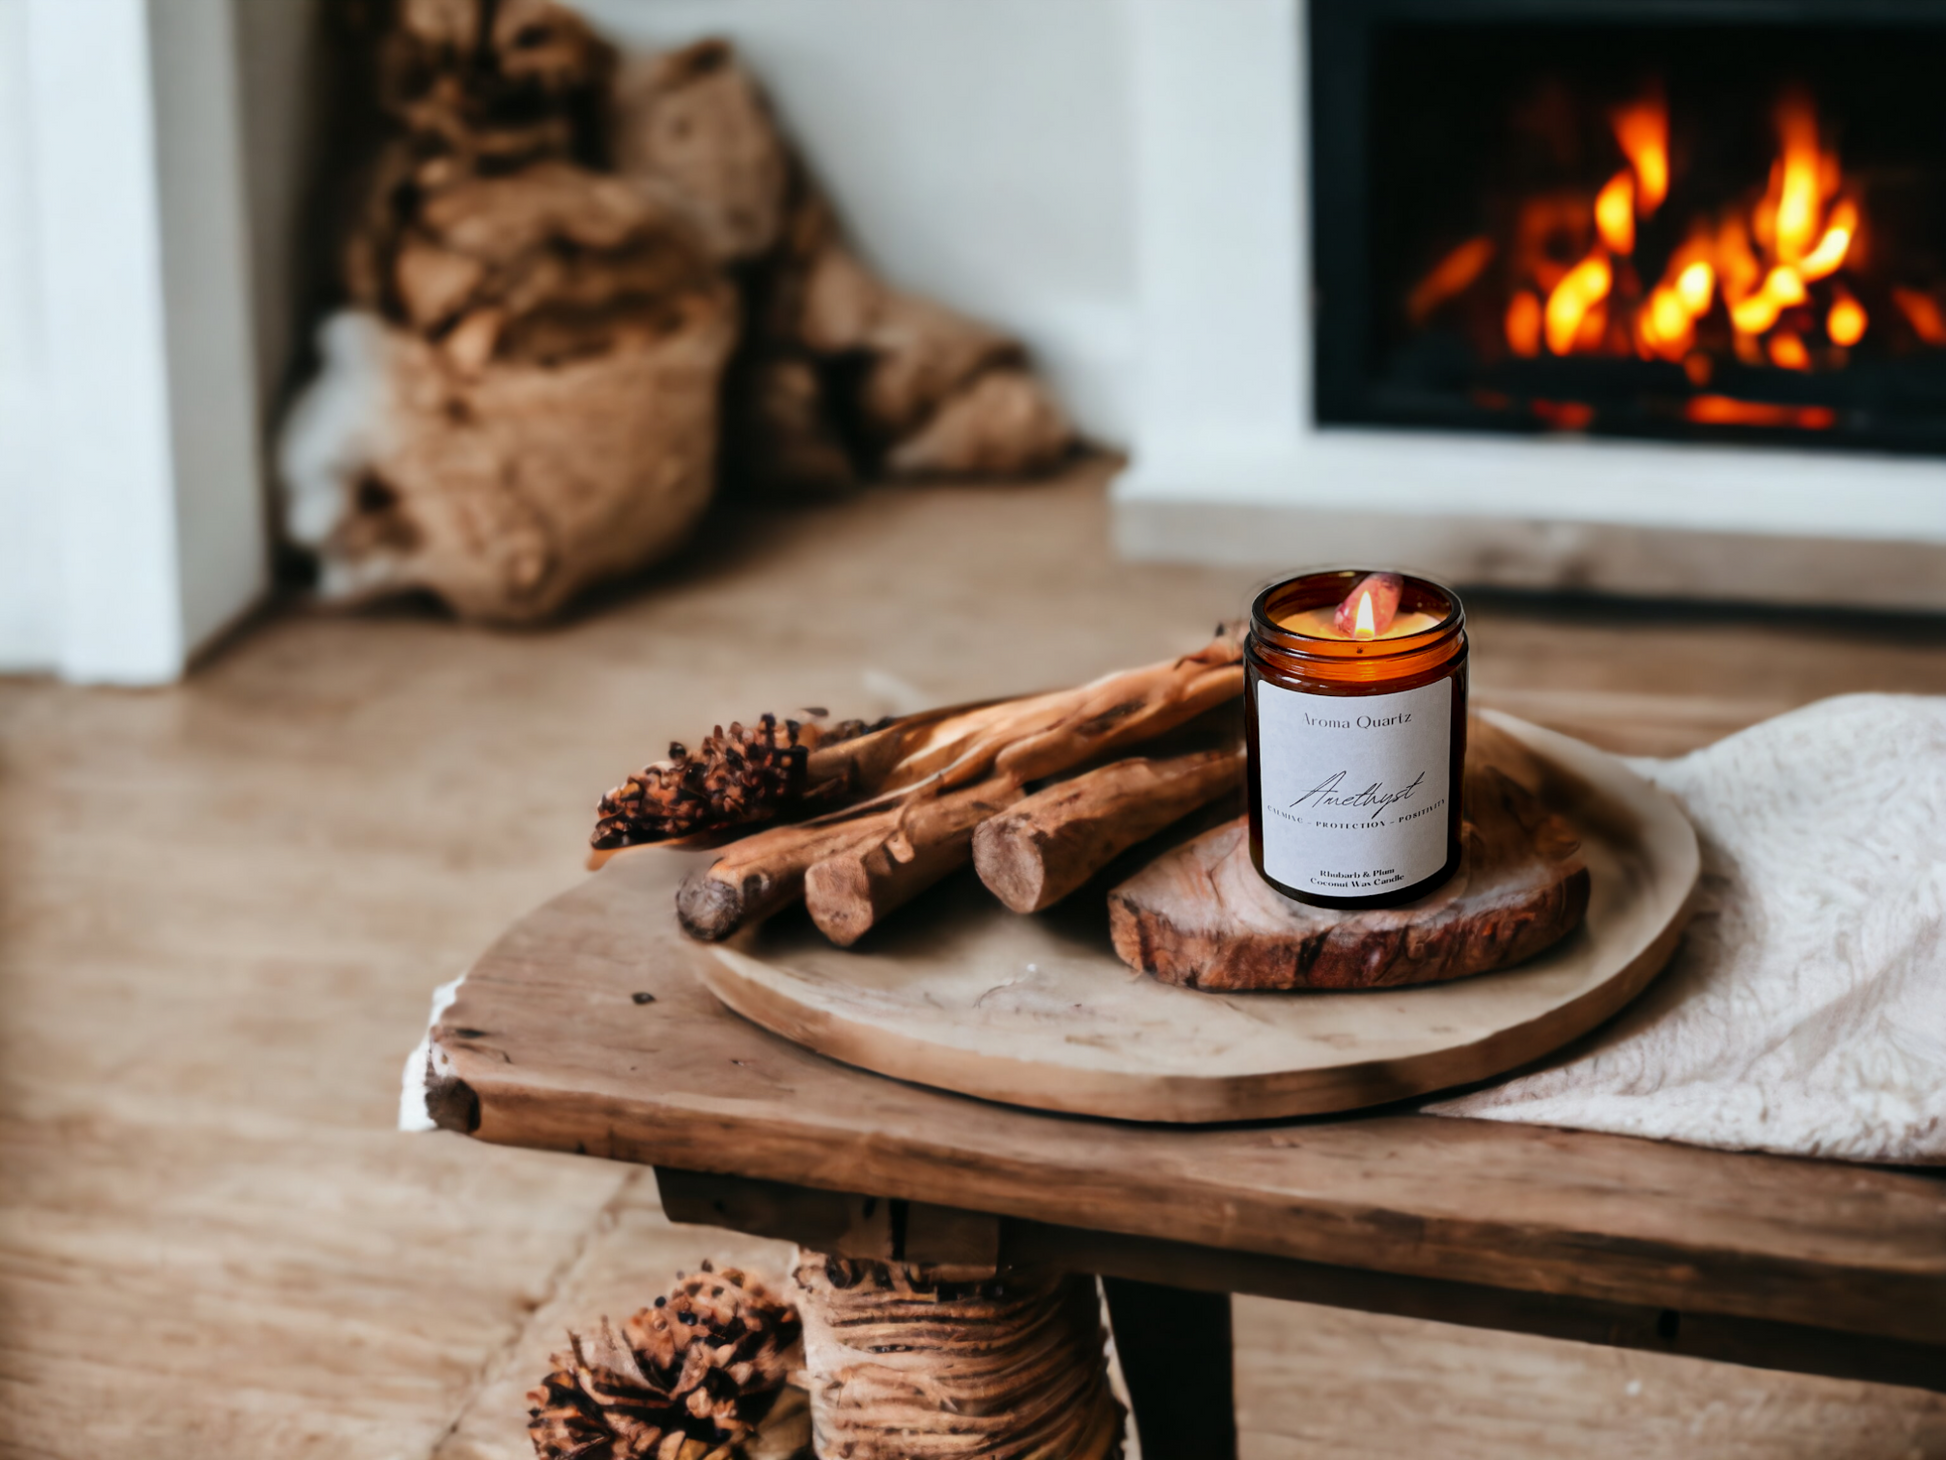 Coconut Wax candle on a rustic wooden table with wooden logs and log fire